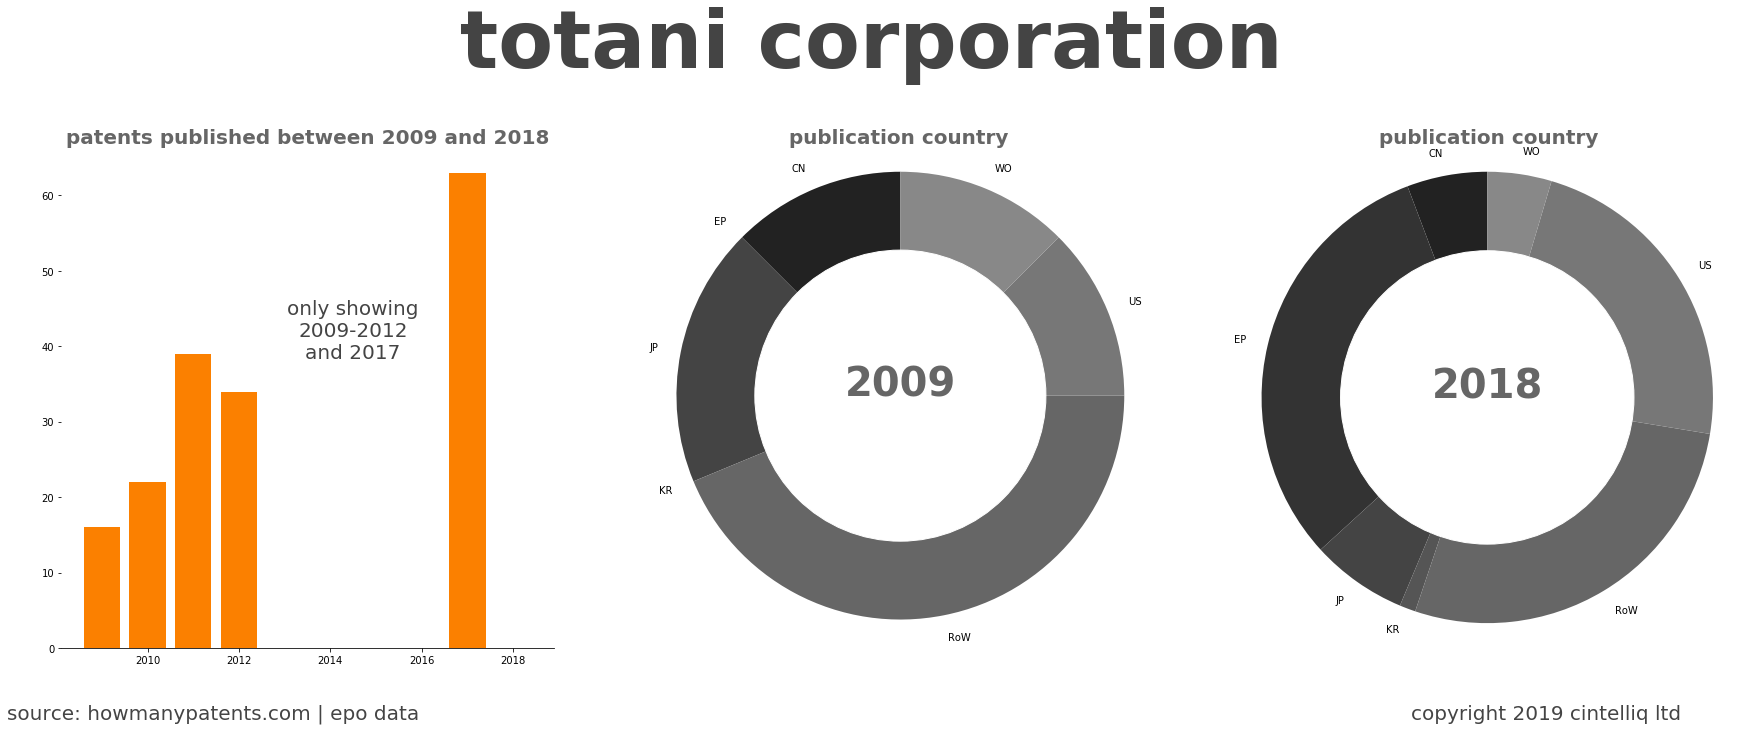 summary of patents for Totani Corporation